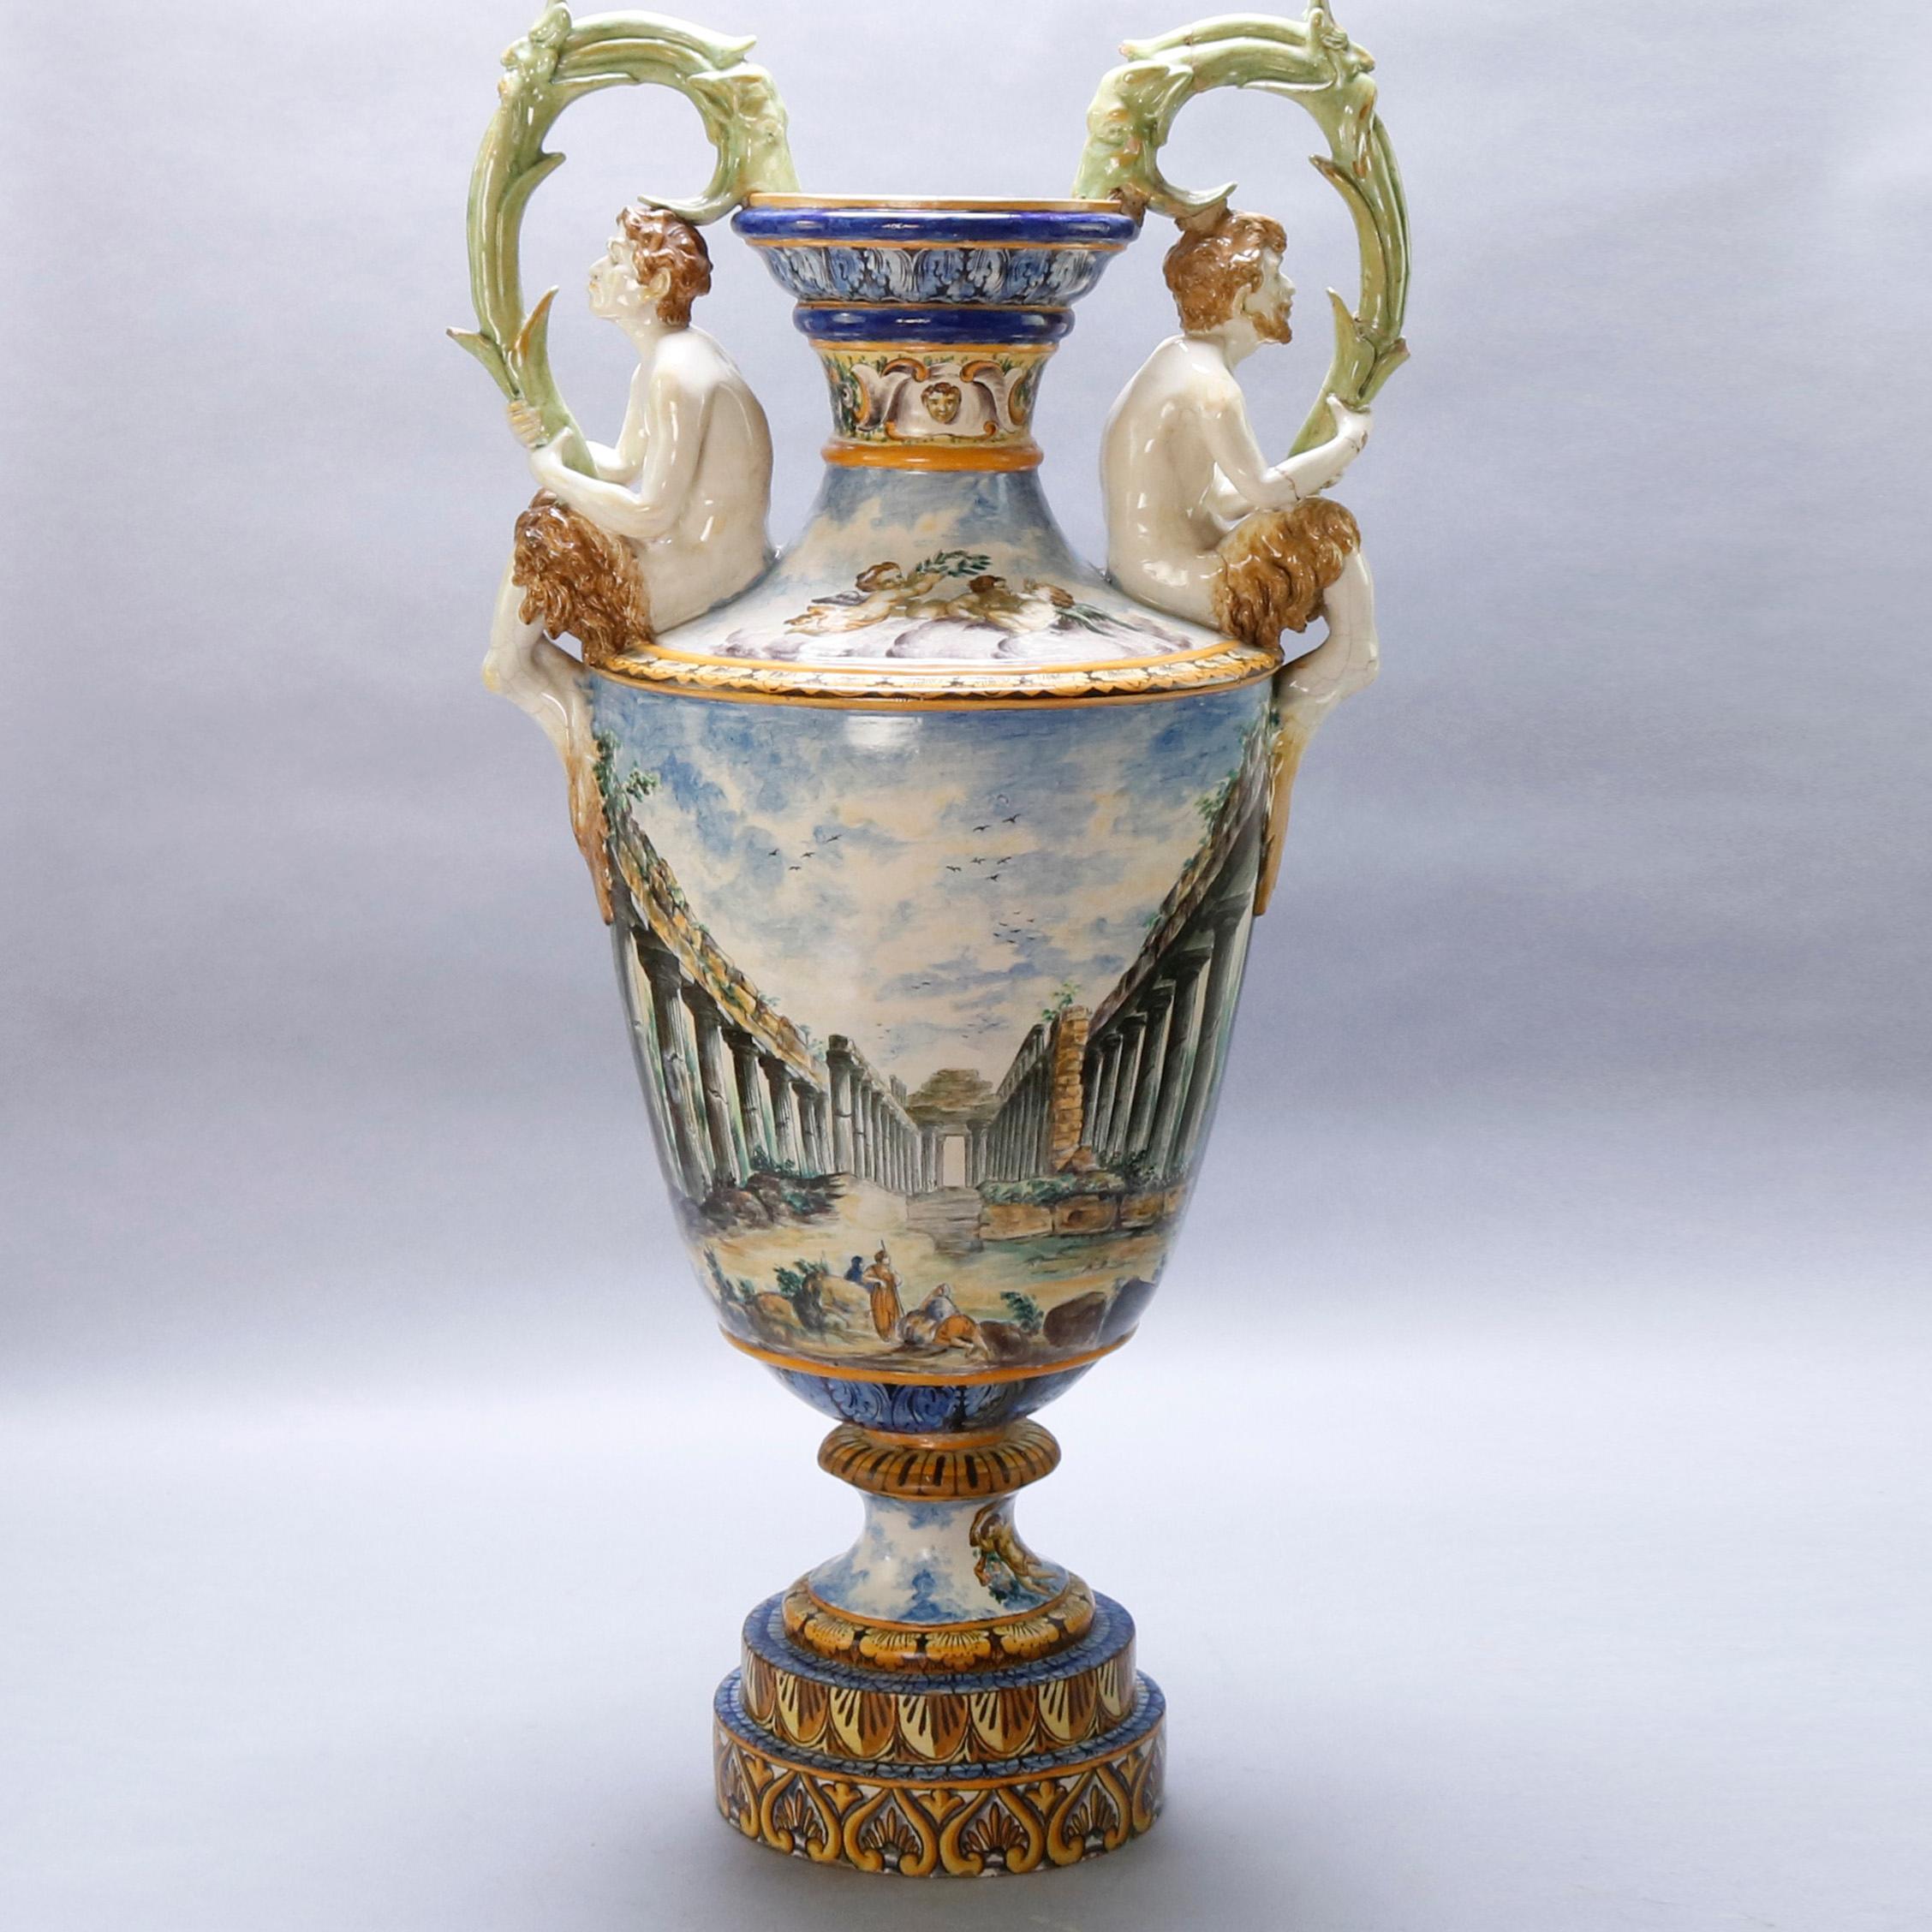 An antique Italian Majolica porcelain figural floor urn offers hand painted and gilt wraparound Classical Greek scene with figures and cherubs, flanking figural handles holding foliate elements, circa 1880

Measures: 39.5